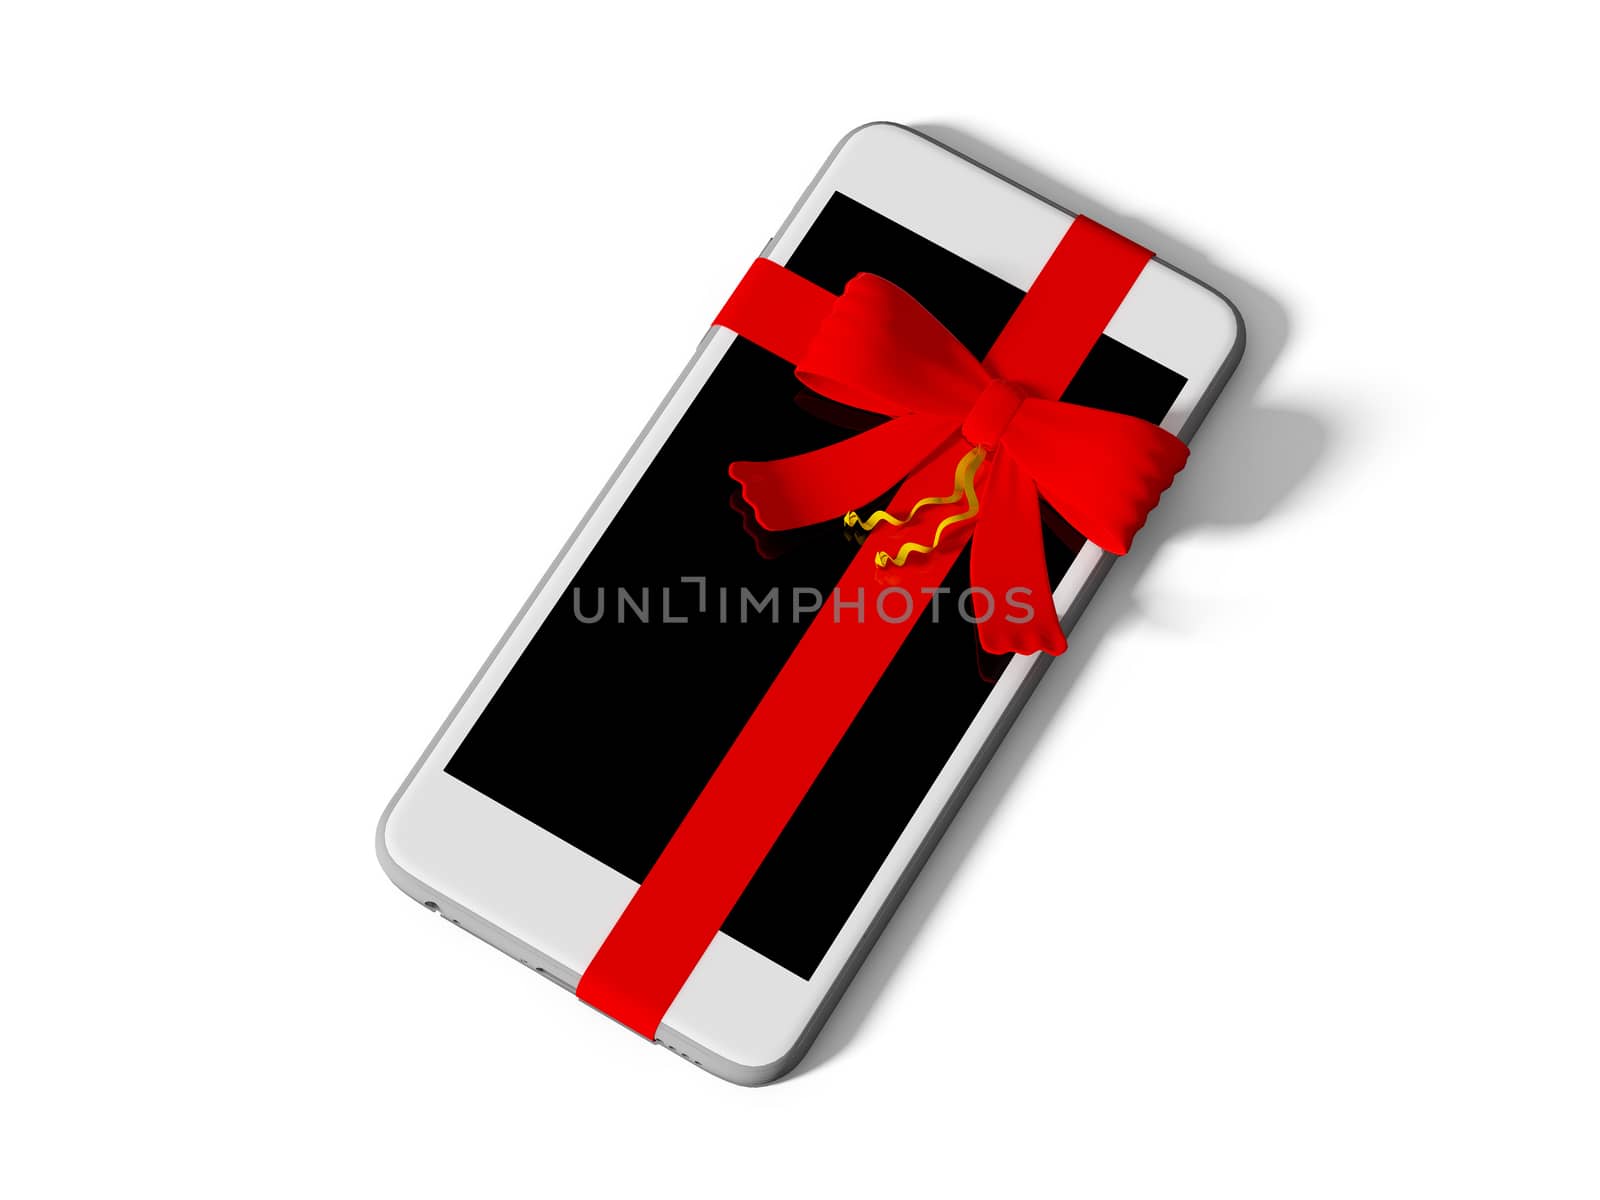 smartphone wrapped with color ribbon, on white background